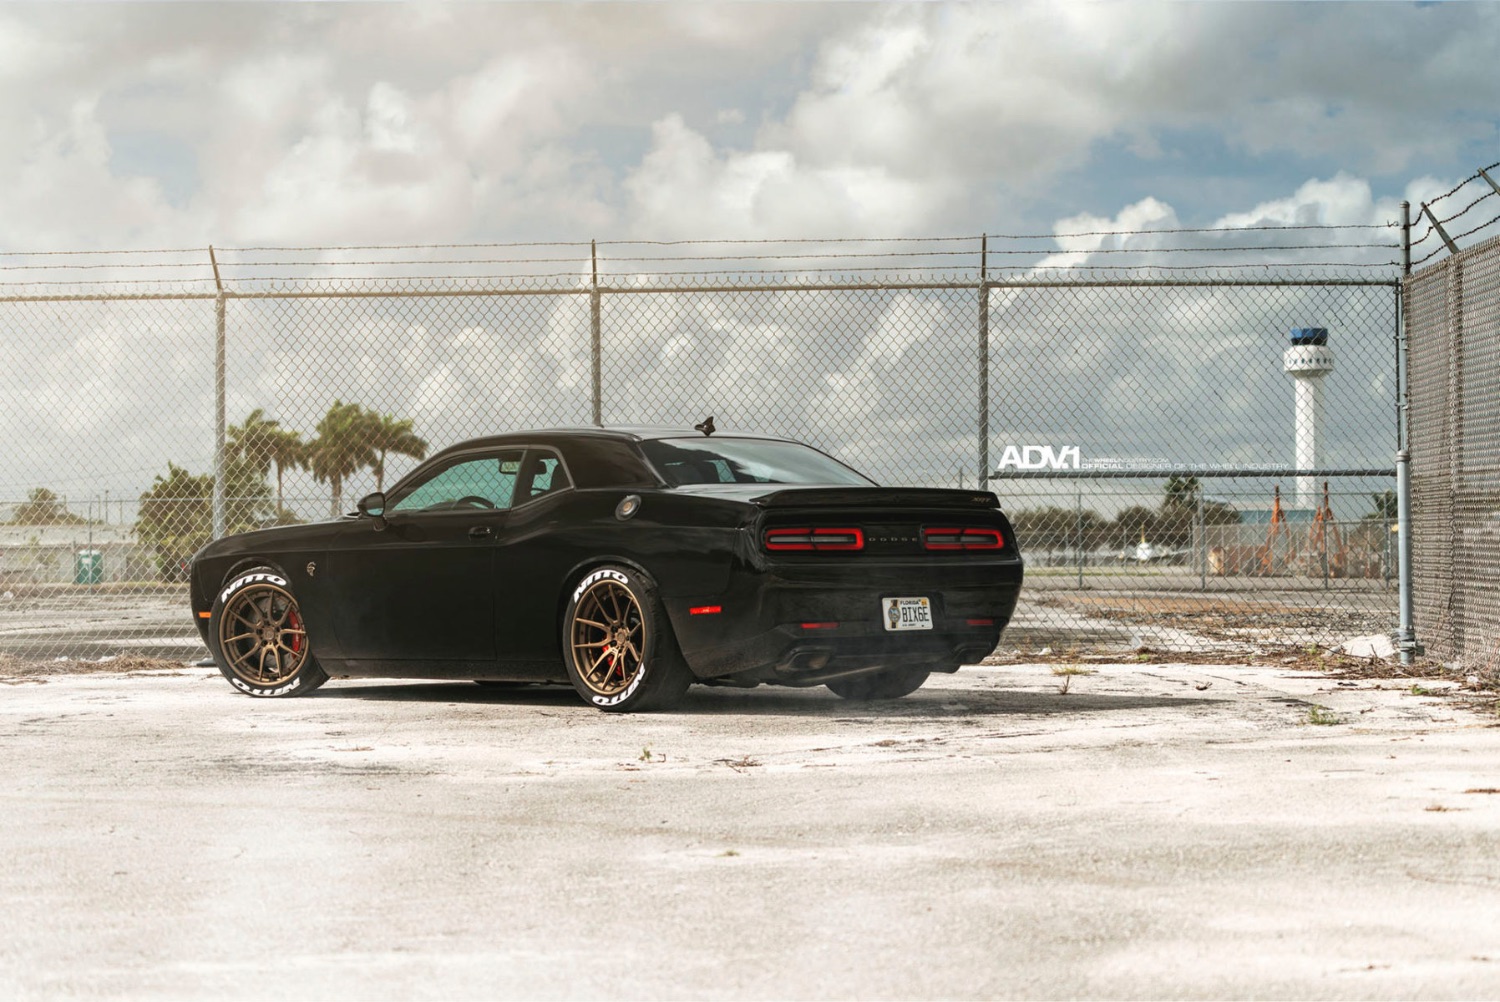 dodge-challenger-srt-hellcat-black-bronze-concave-adv1-wheels-lowered-modified-aftermarket-wallpaper-background-racing-rimsnitto-tire-letters-e